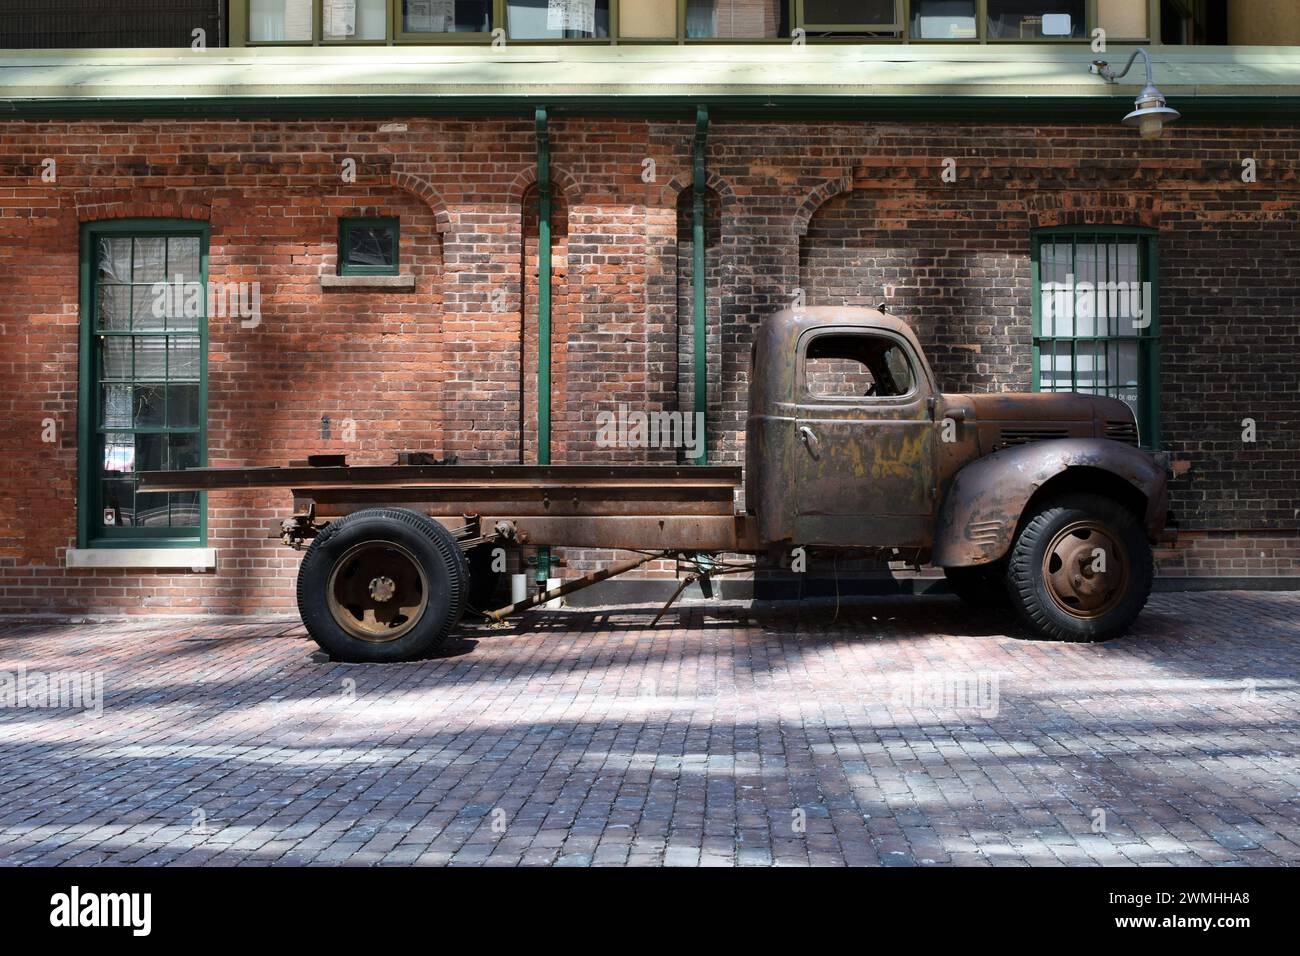 Rusty Vintage 1940s American Dodge Flatbed Truck next to a Brick Wall in the Historic Distillery District, Toronto, Ontario, Canada Stock Photo